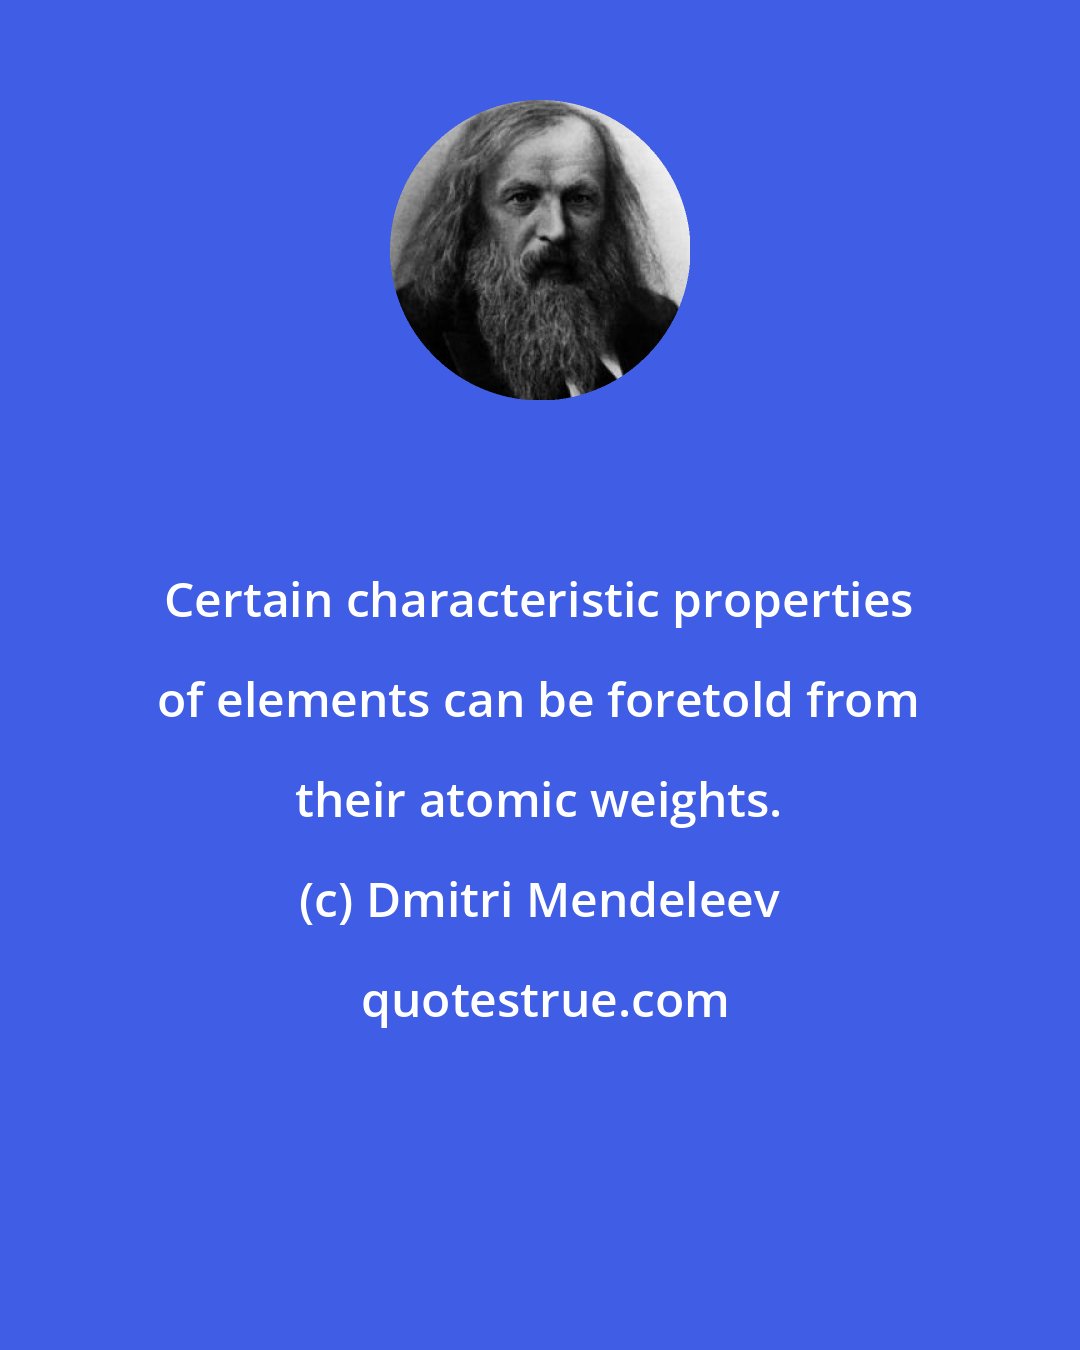 Dmitri Mendeleev: Certain characteristic properties of elements can be foretold from their atomic weights.